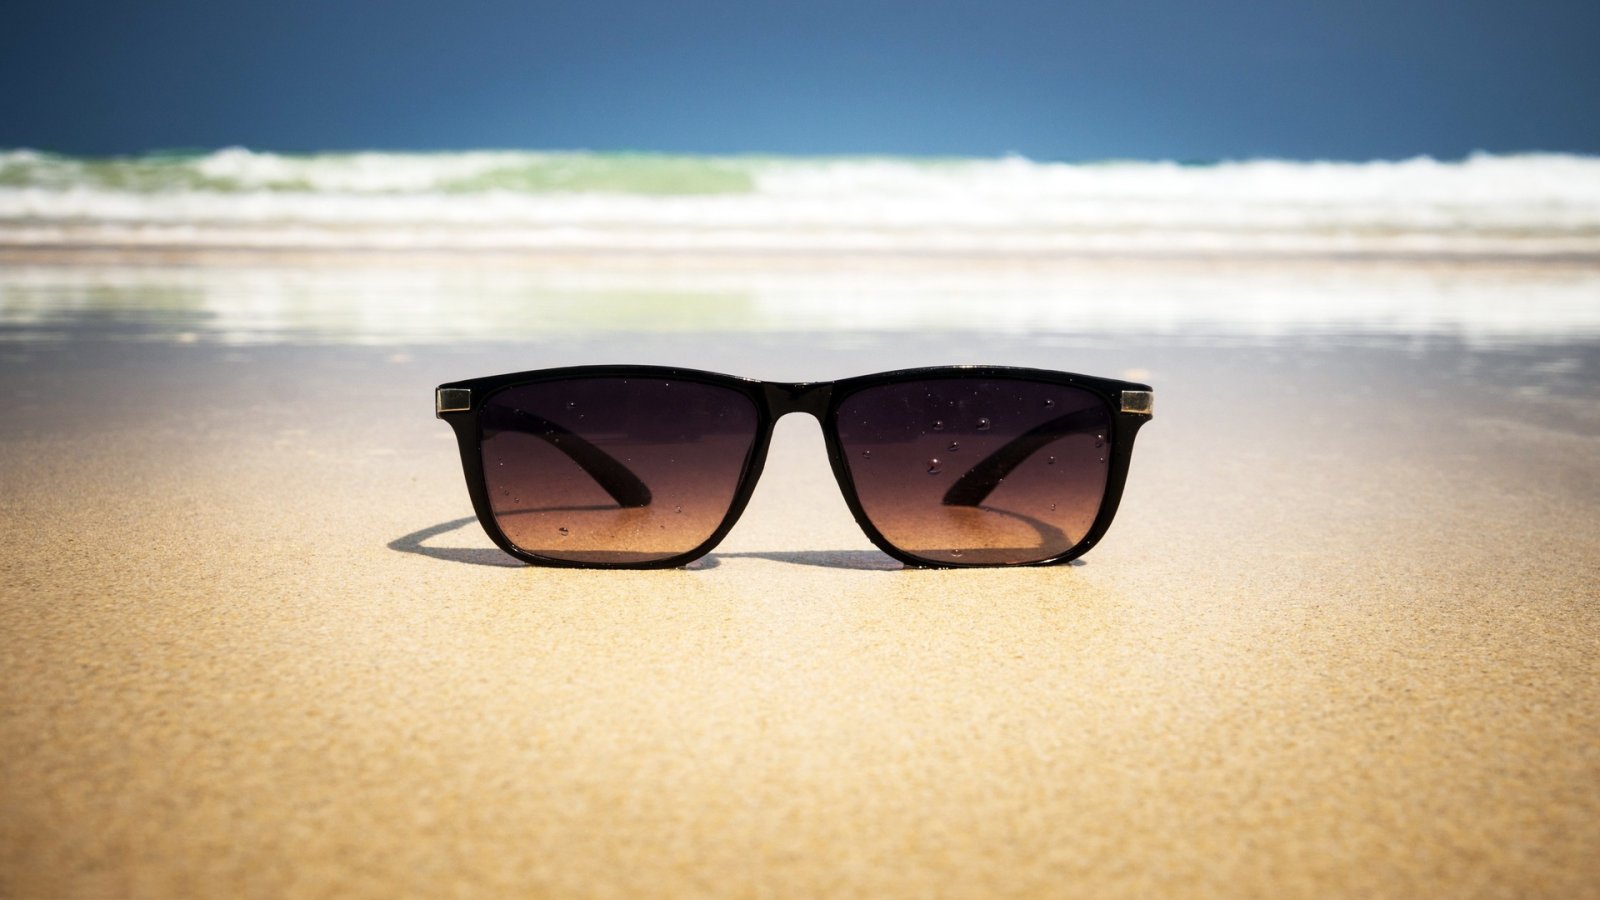 Top 6 picks for cool & affordable summer sunglasses